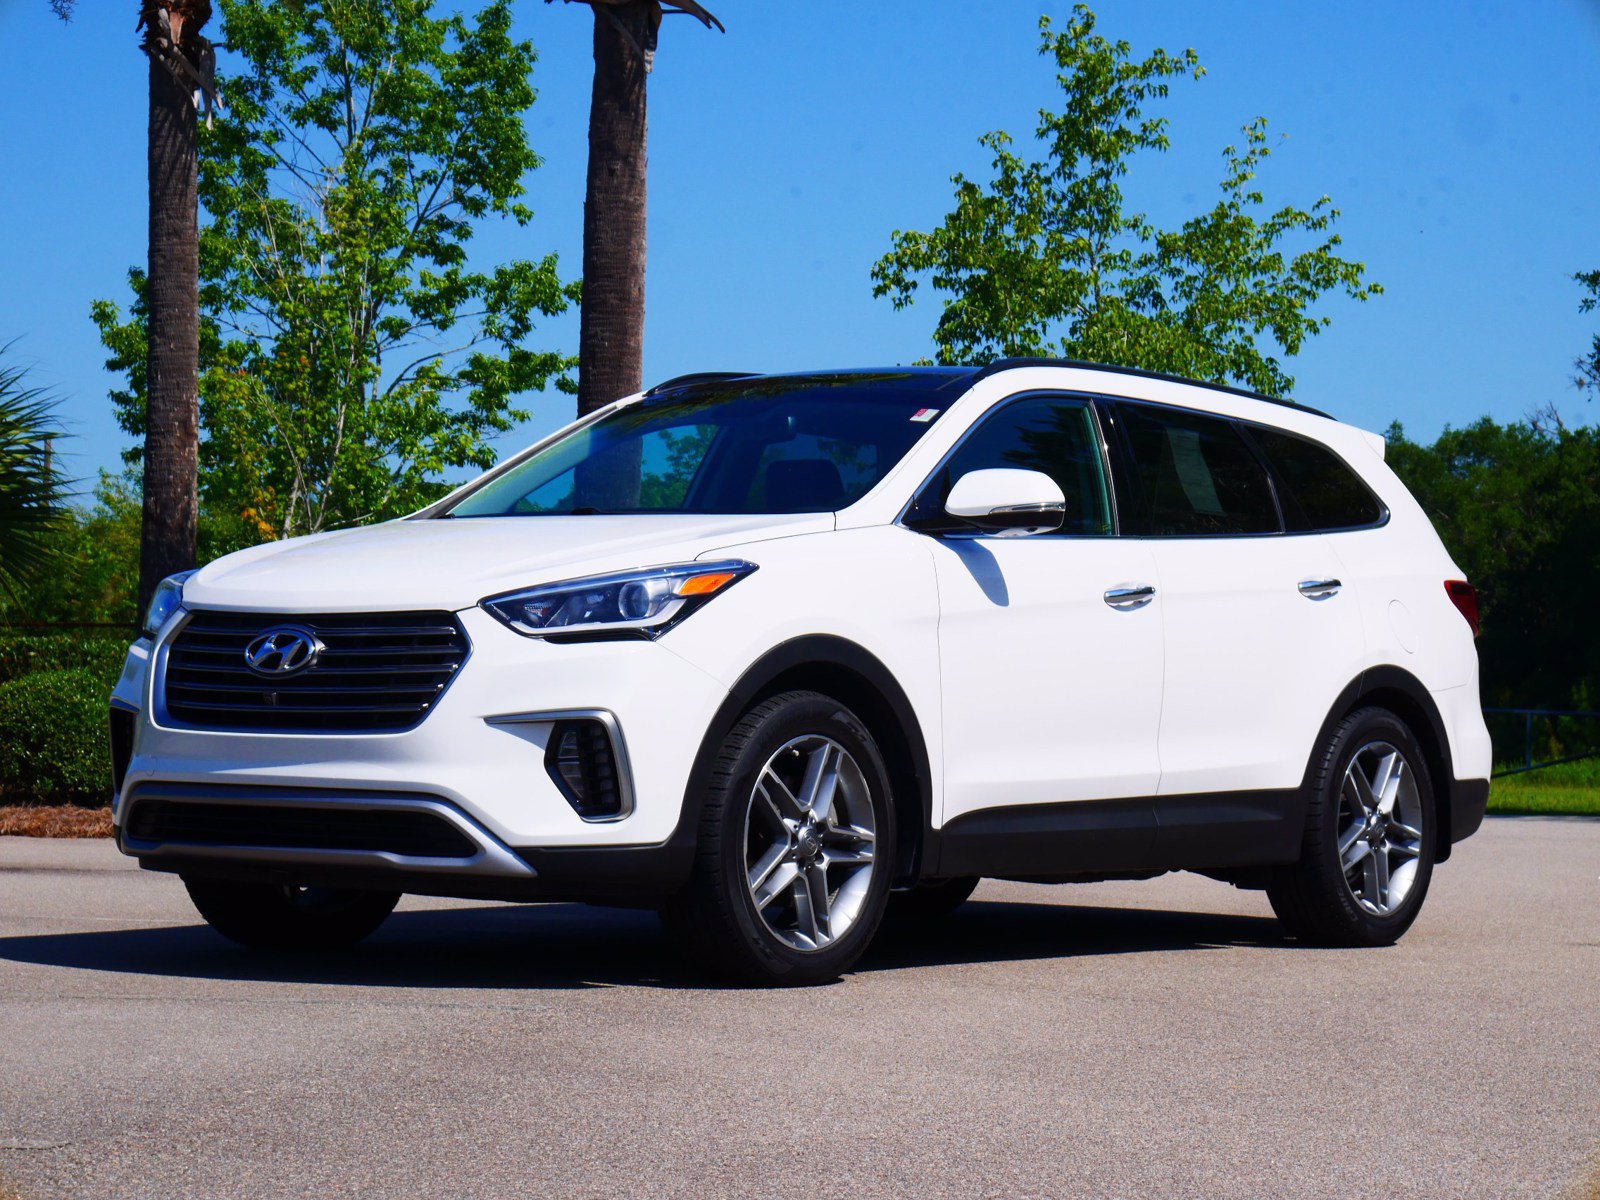 PreOwned 2018 Hyundai Santa Fe Limited Ultimate FWD 4D